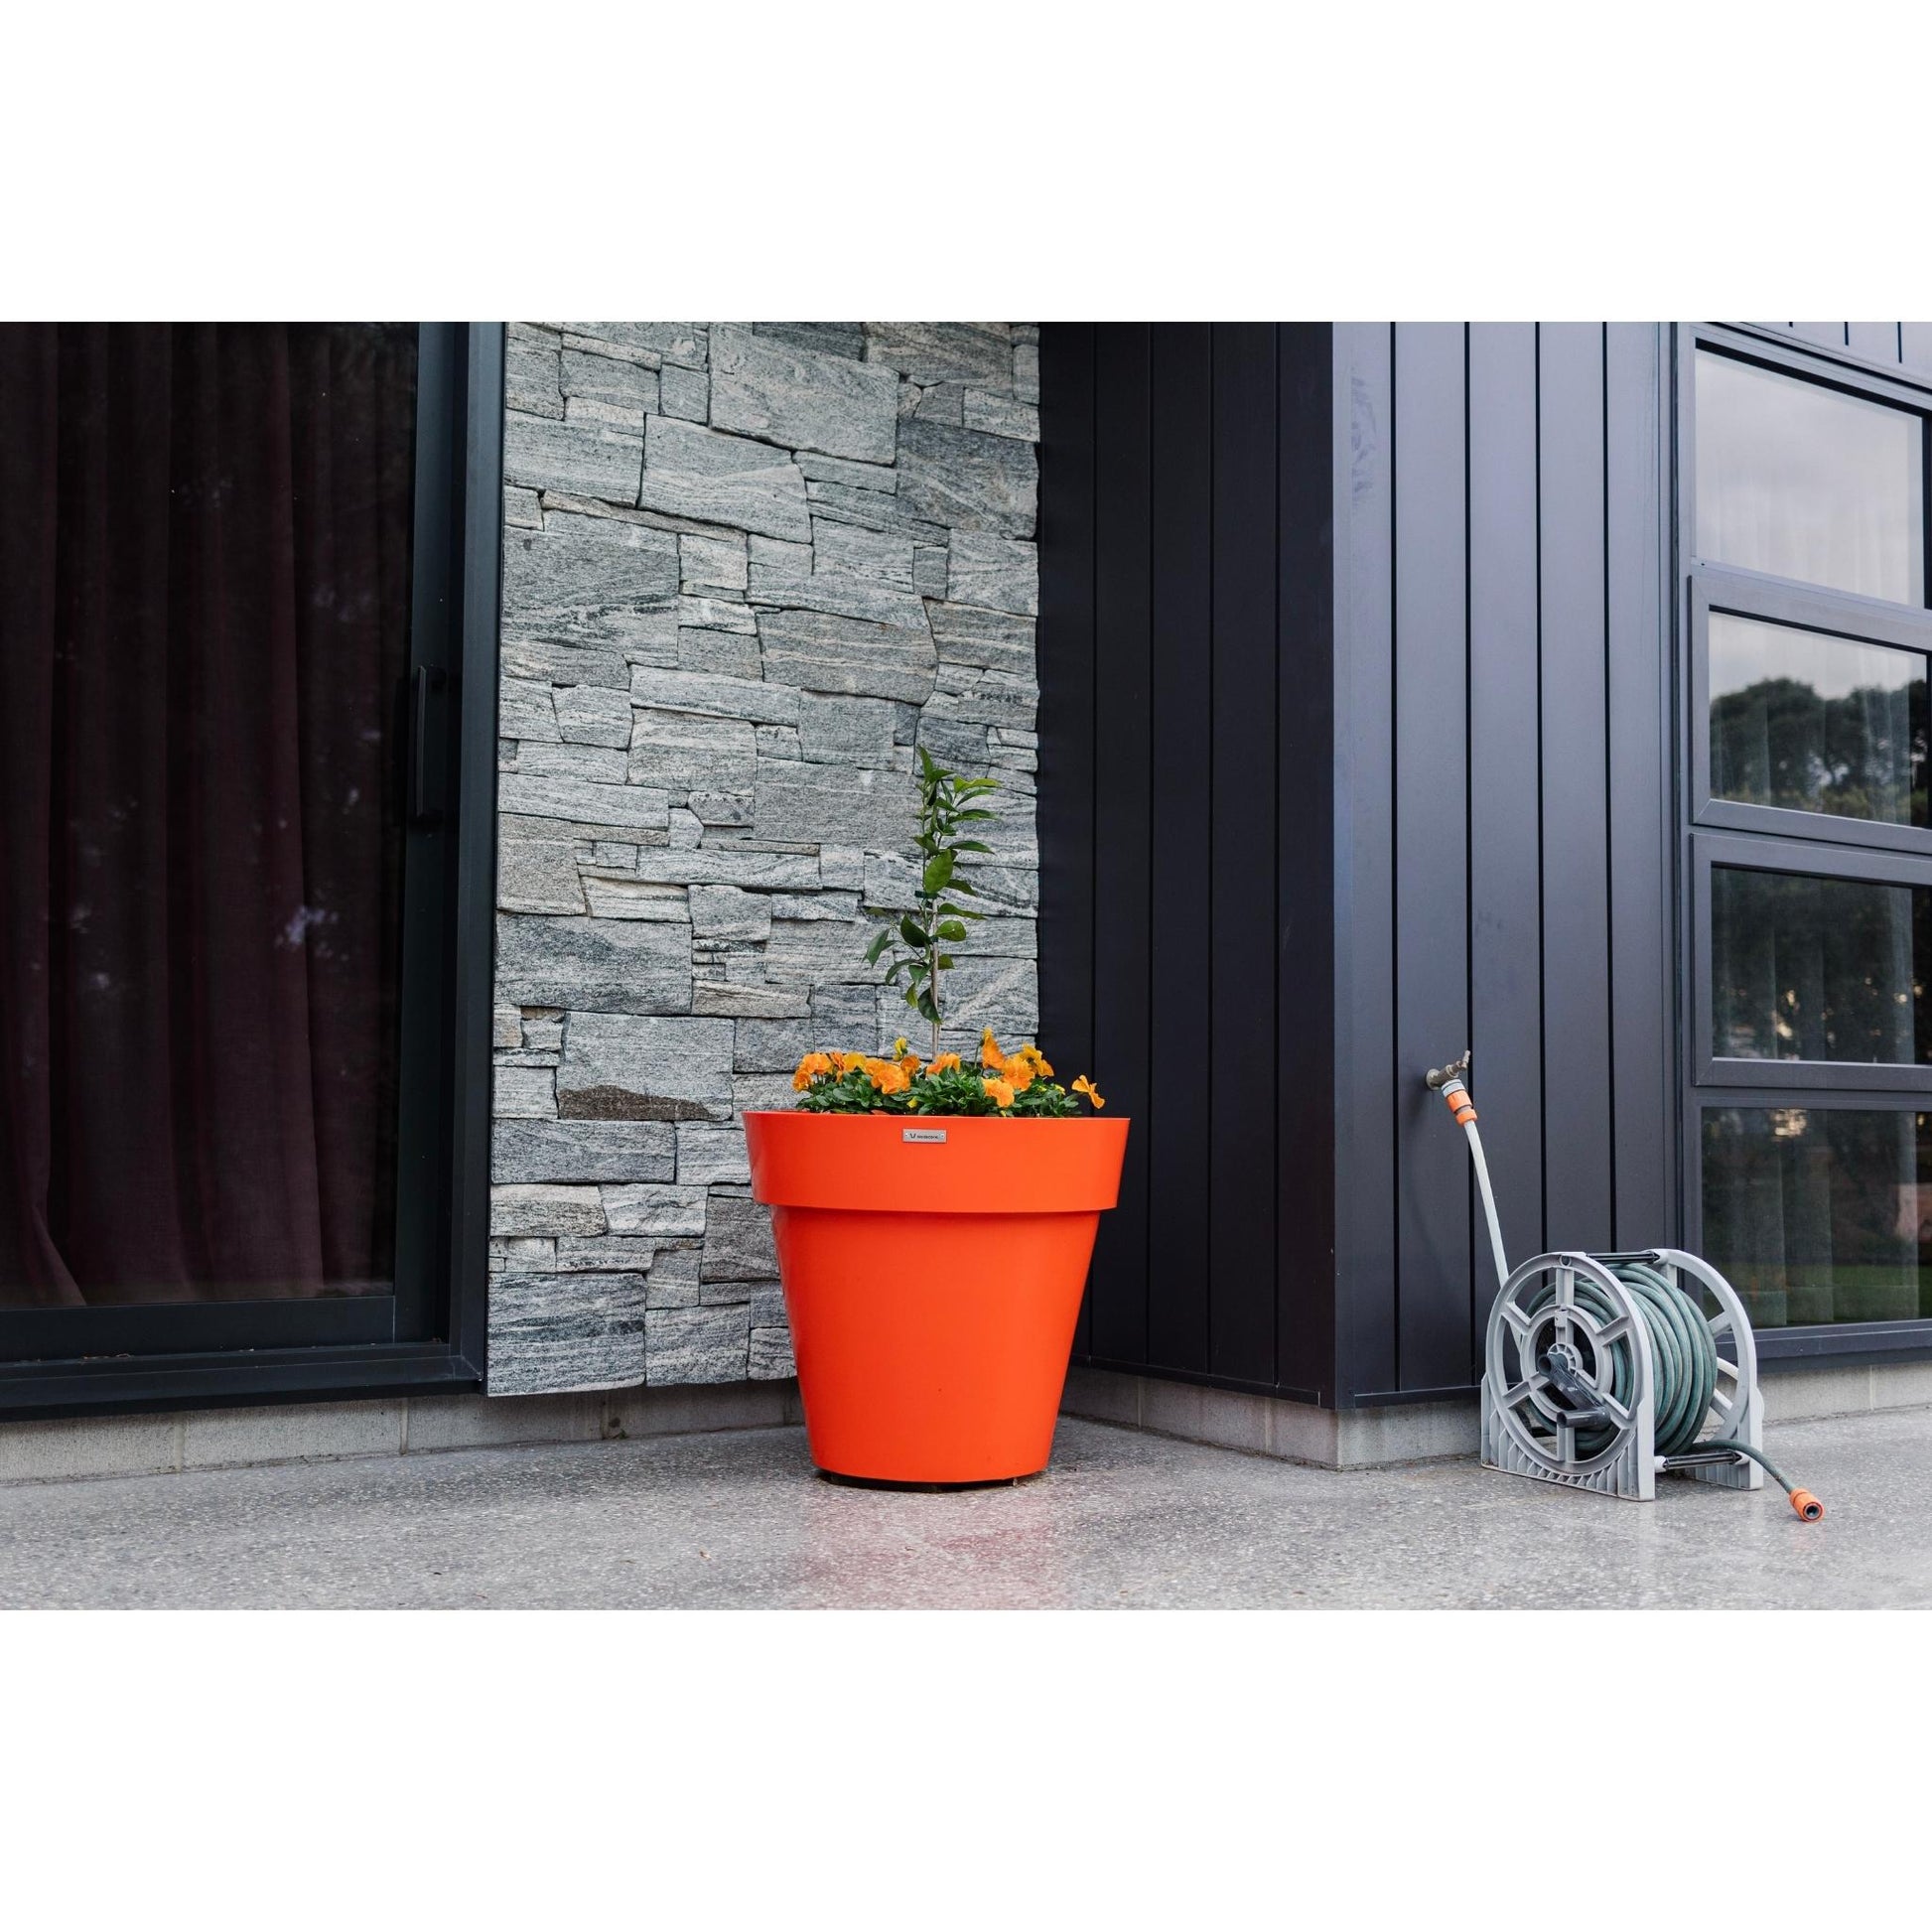 A large orange planter pot in front of a house wall. The pot is planted with a citrus tree and some flowers. 